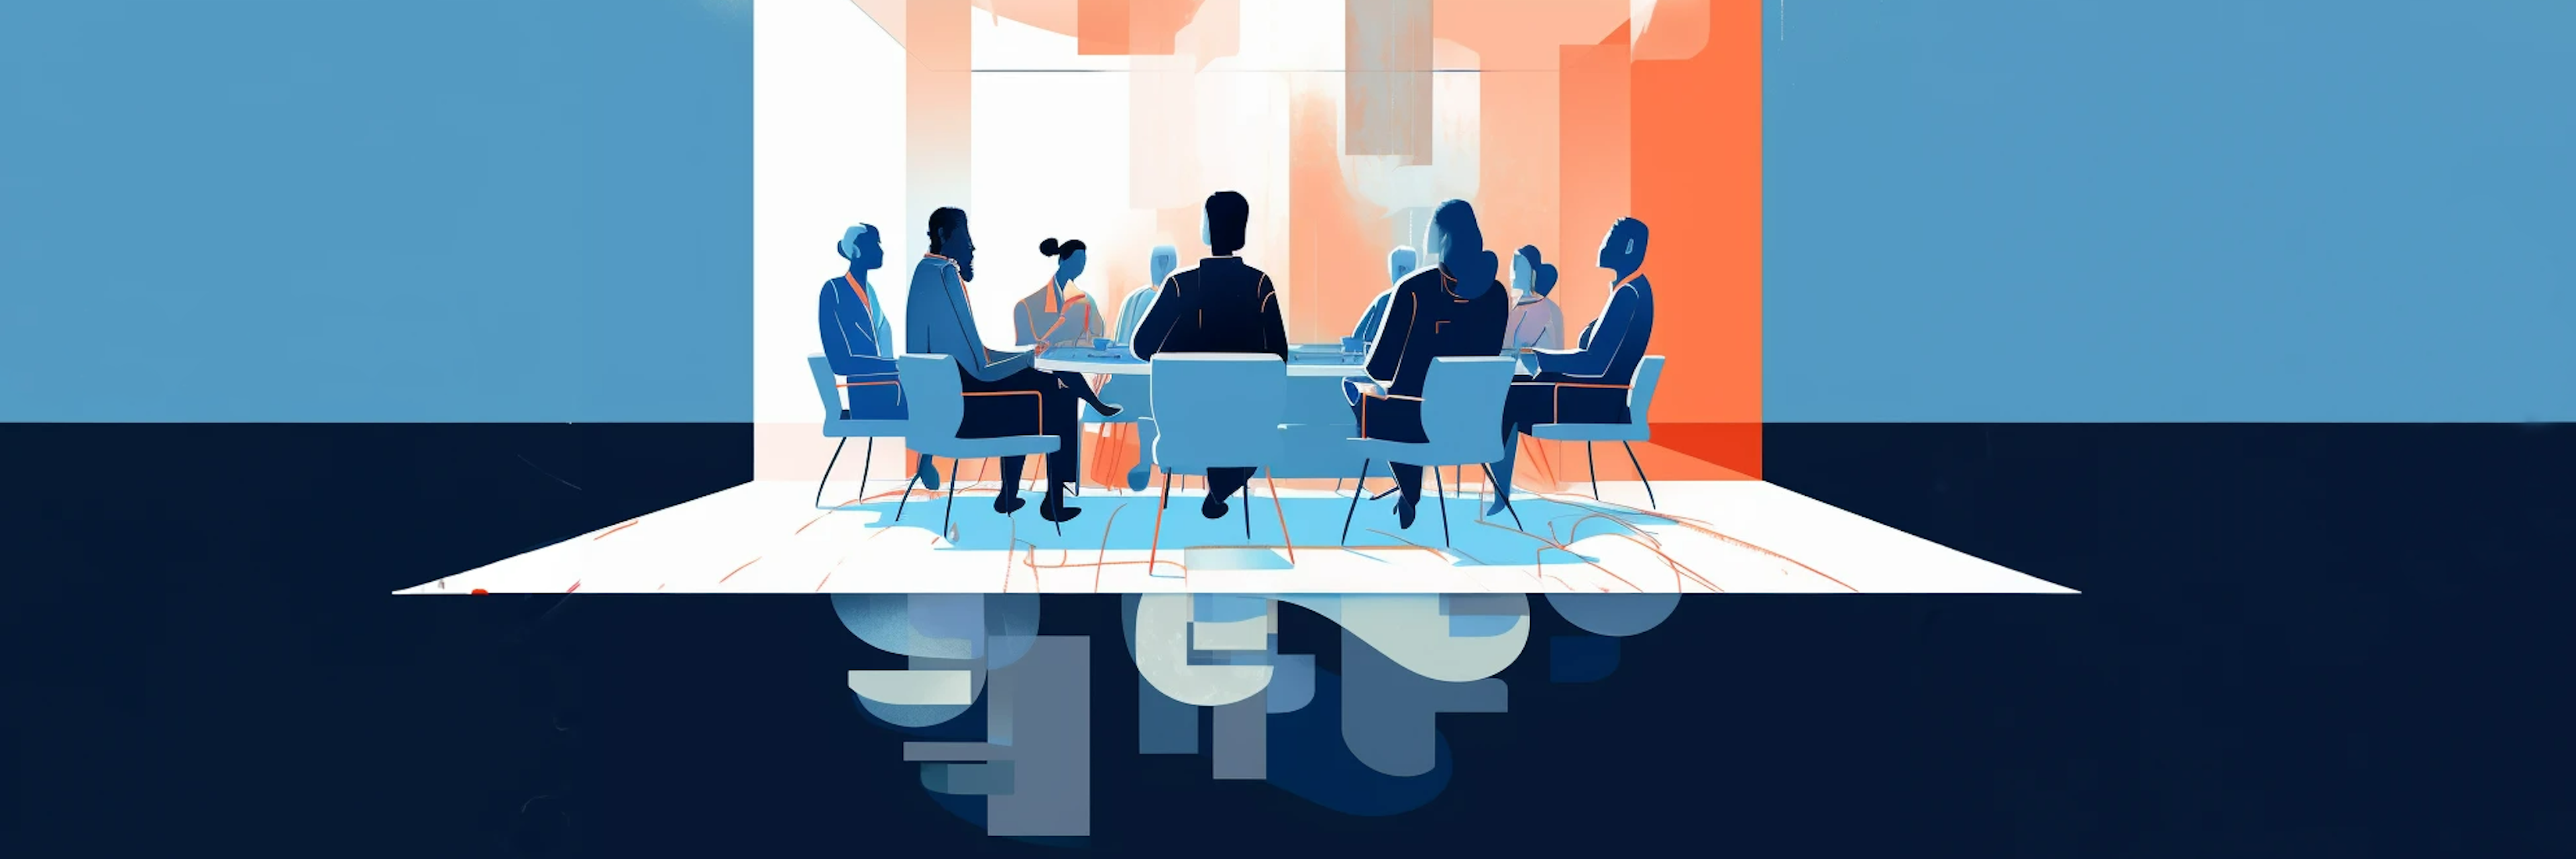 Graphics of people sitting around a table